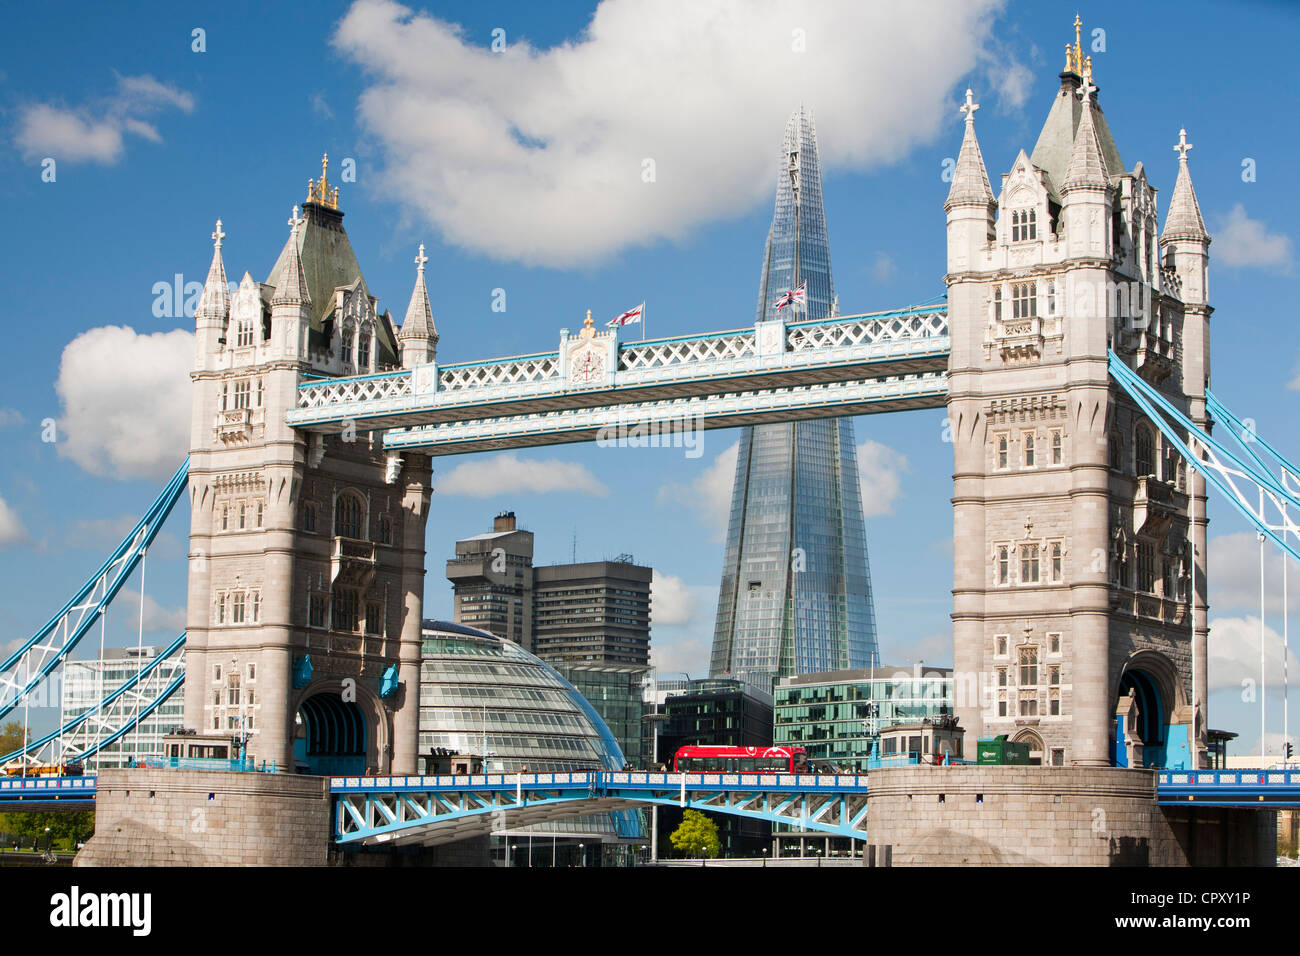 The Tower Bridge and the Shard in London, UK. The Shard at 310m or over 1000 feet tall, is the tallest building in Europe. Stock Photo